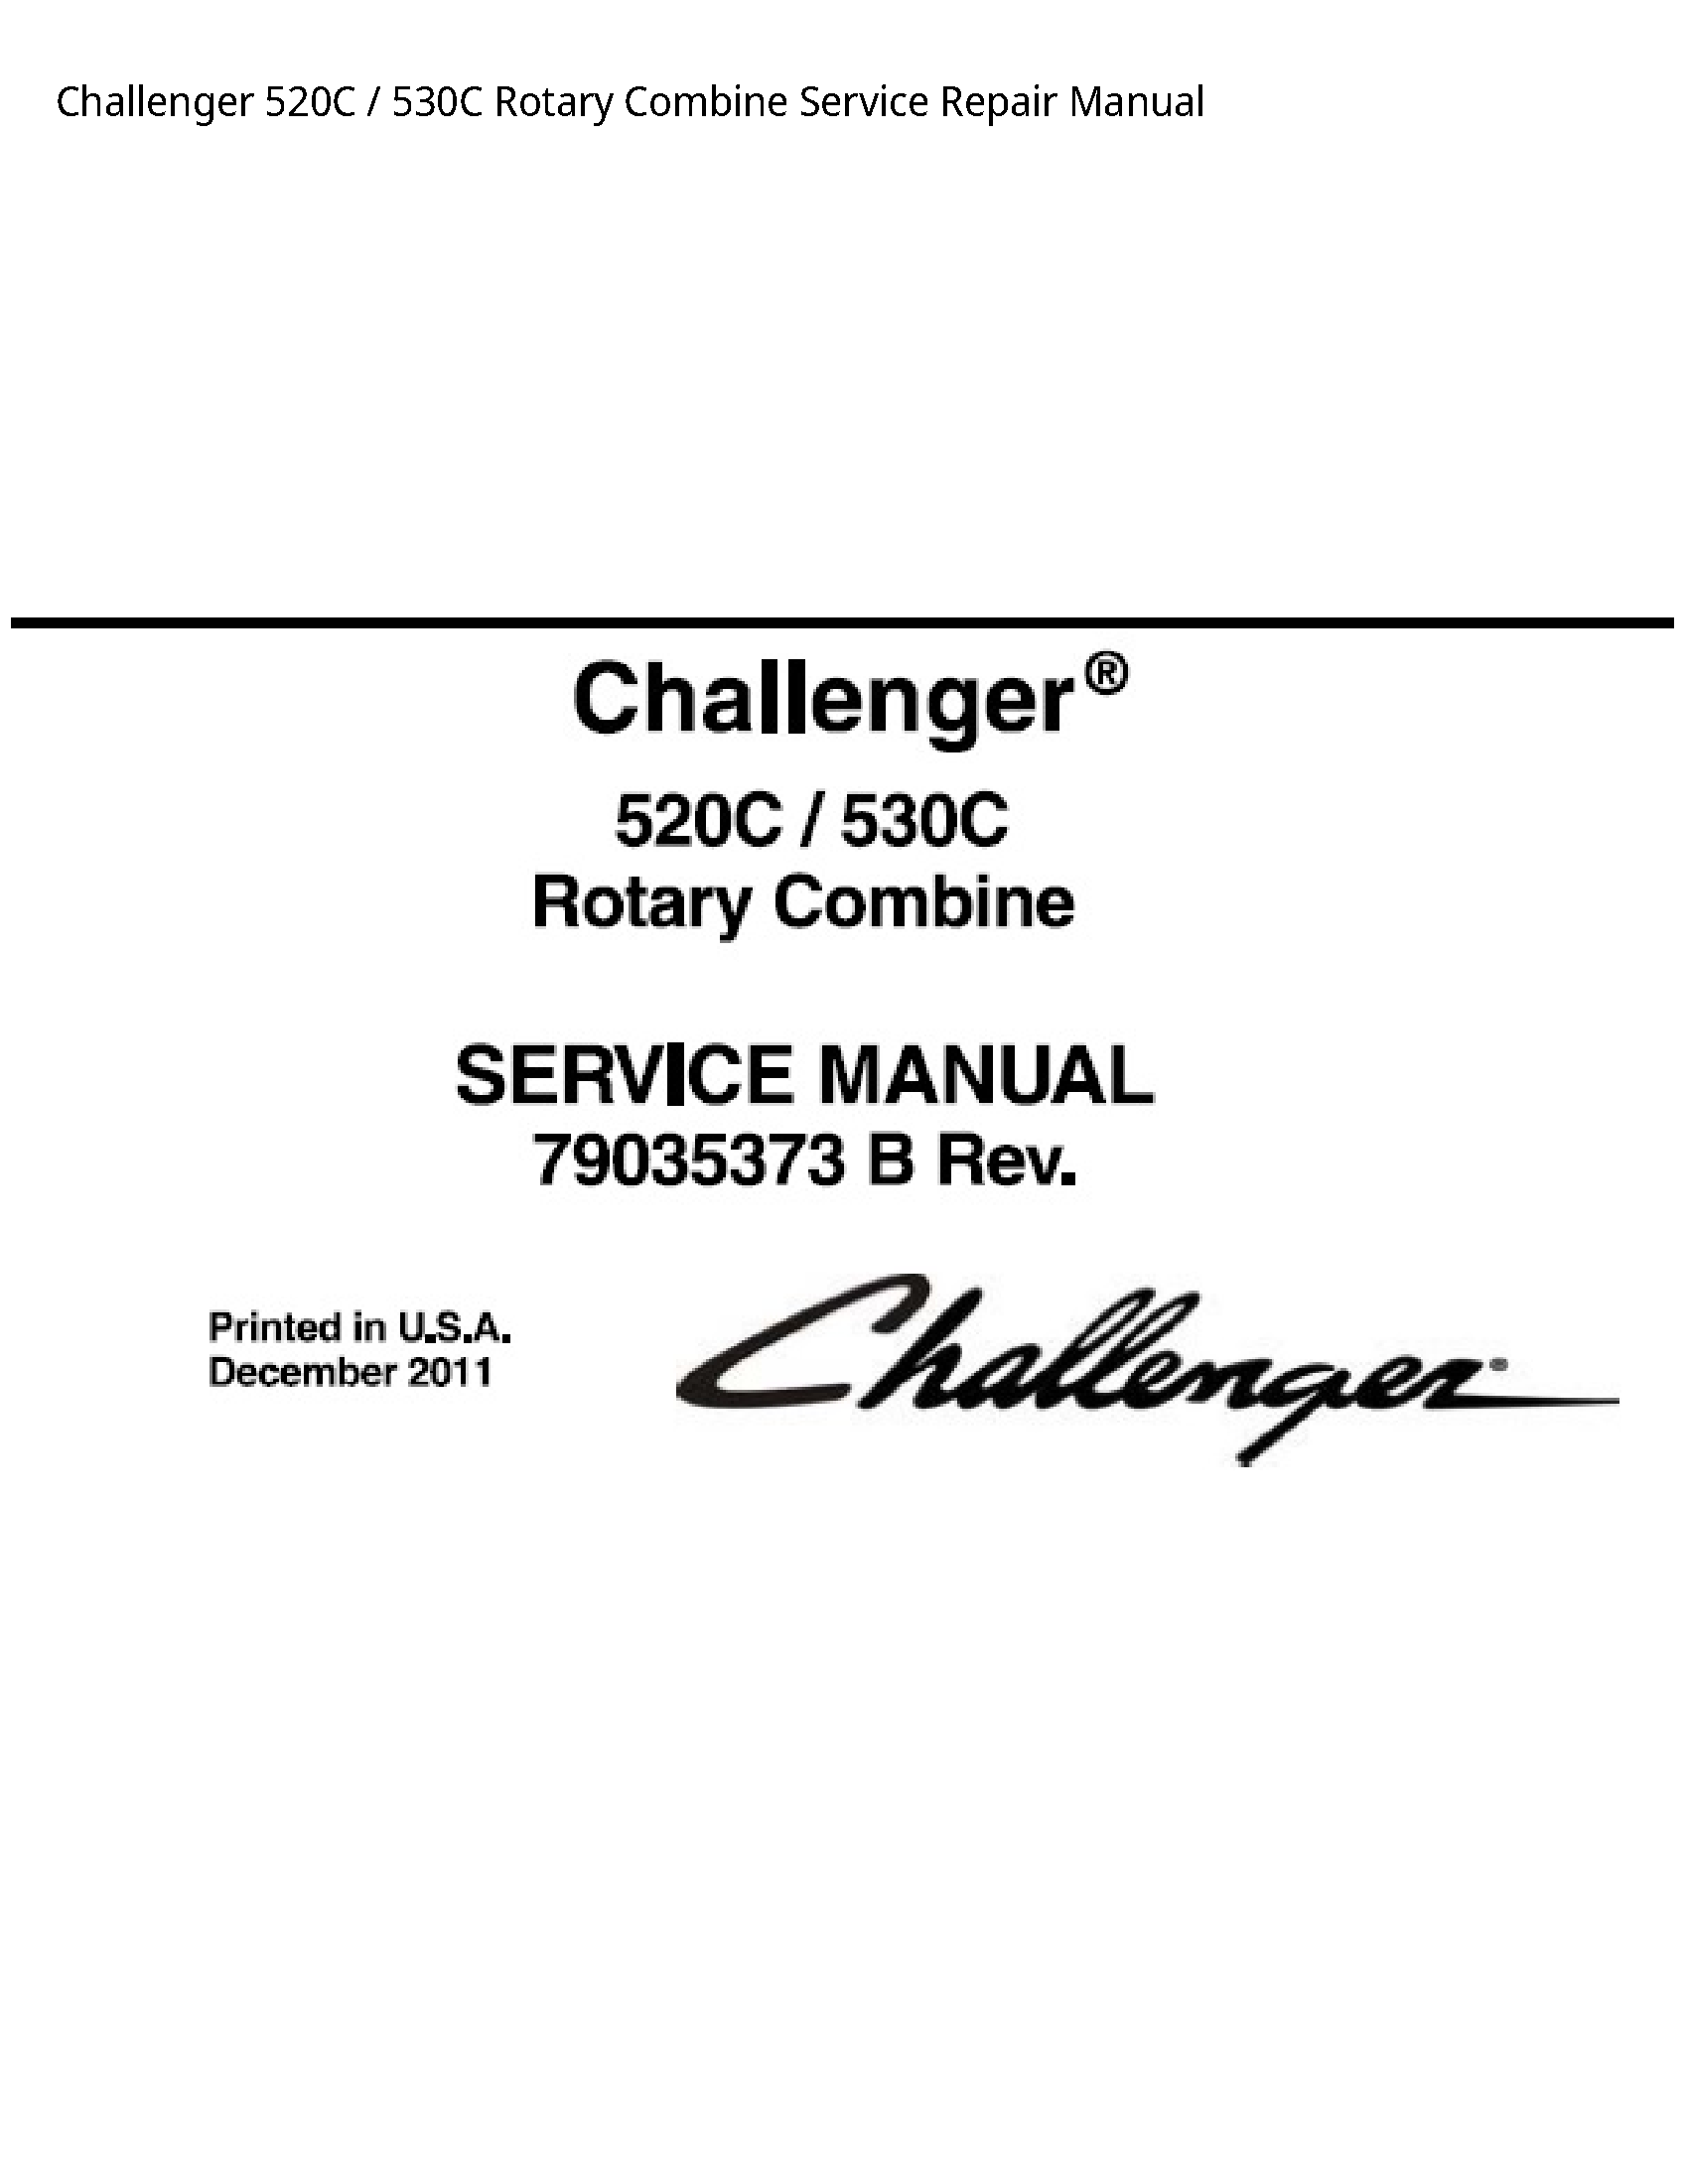 Challenger 520C Rotary Combine manual